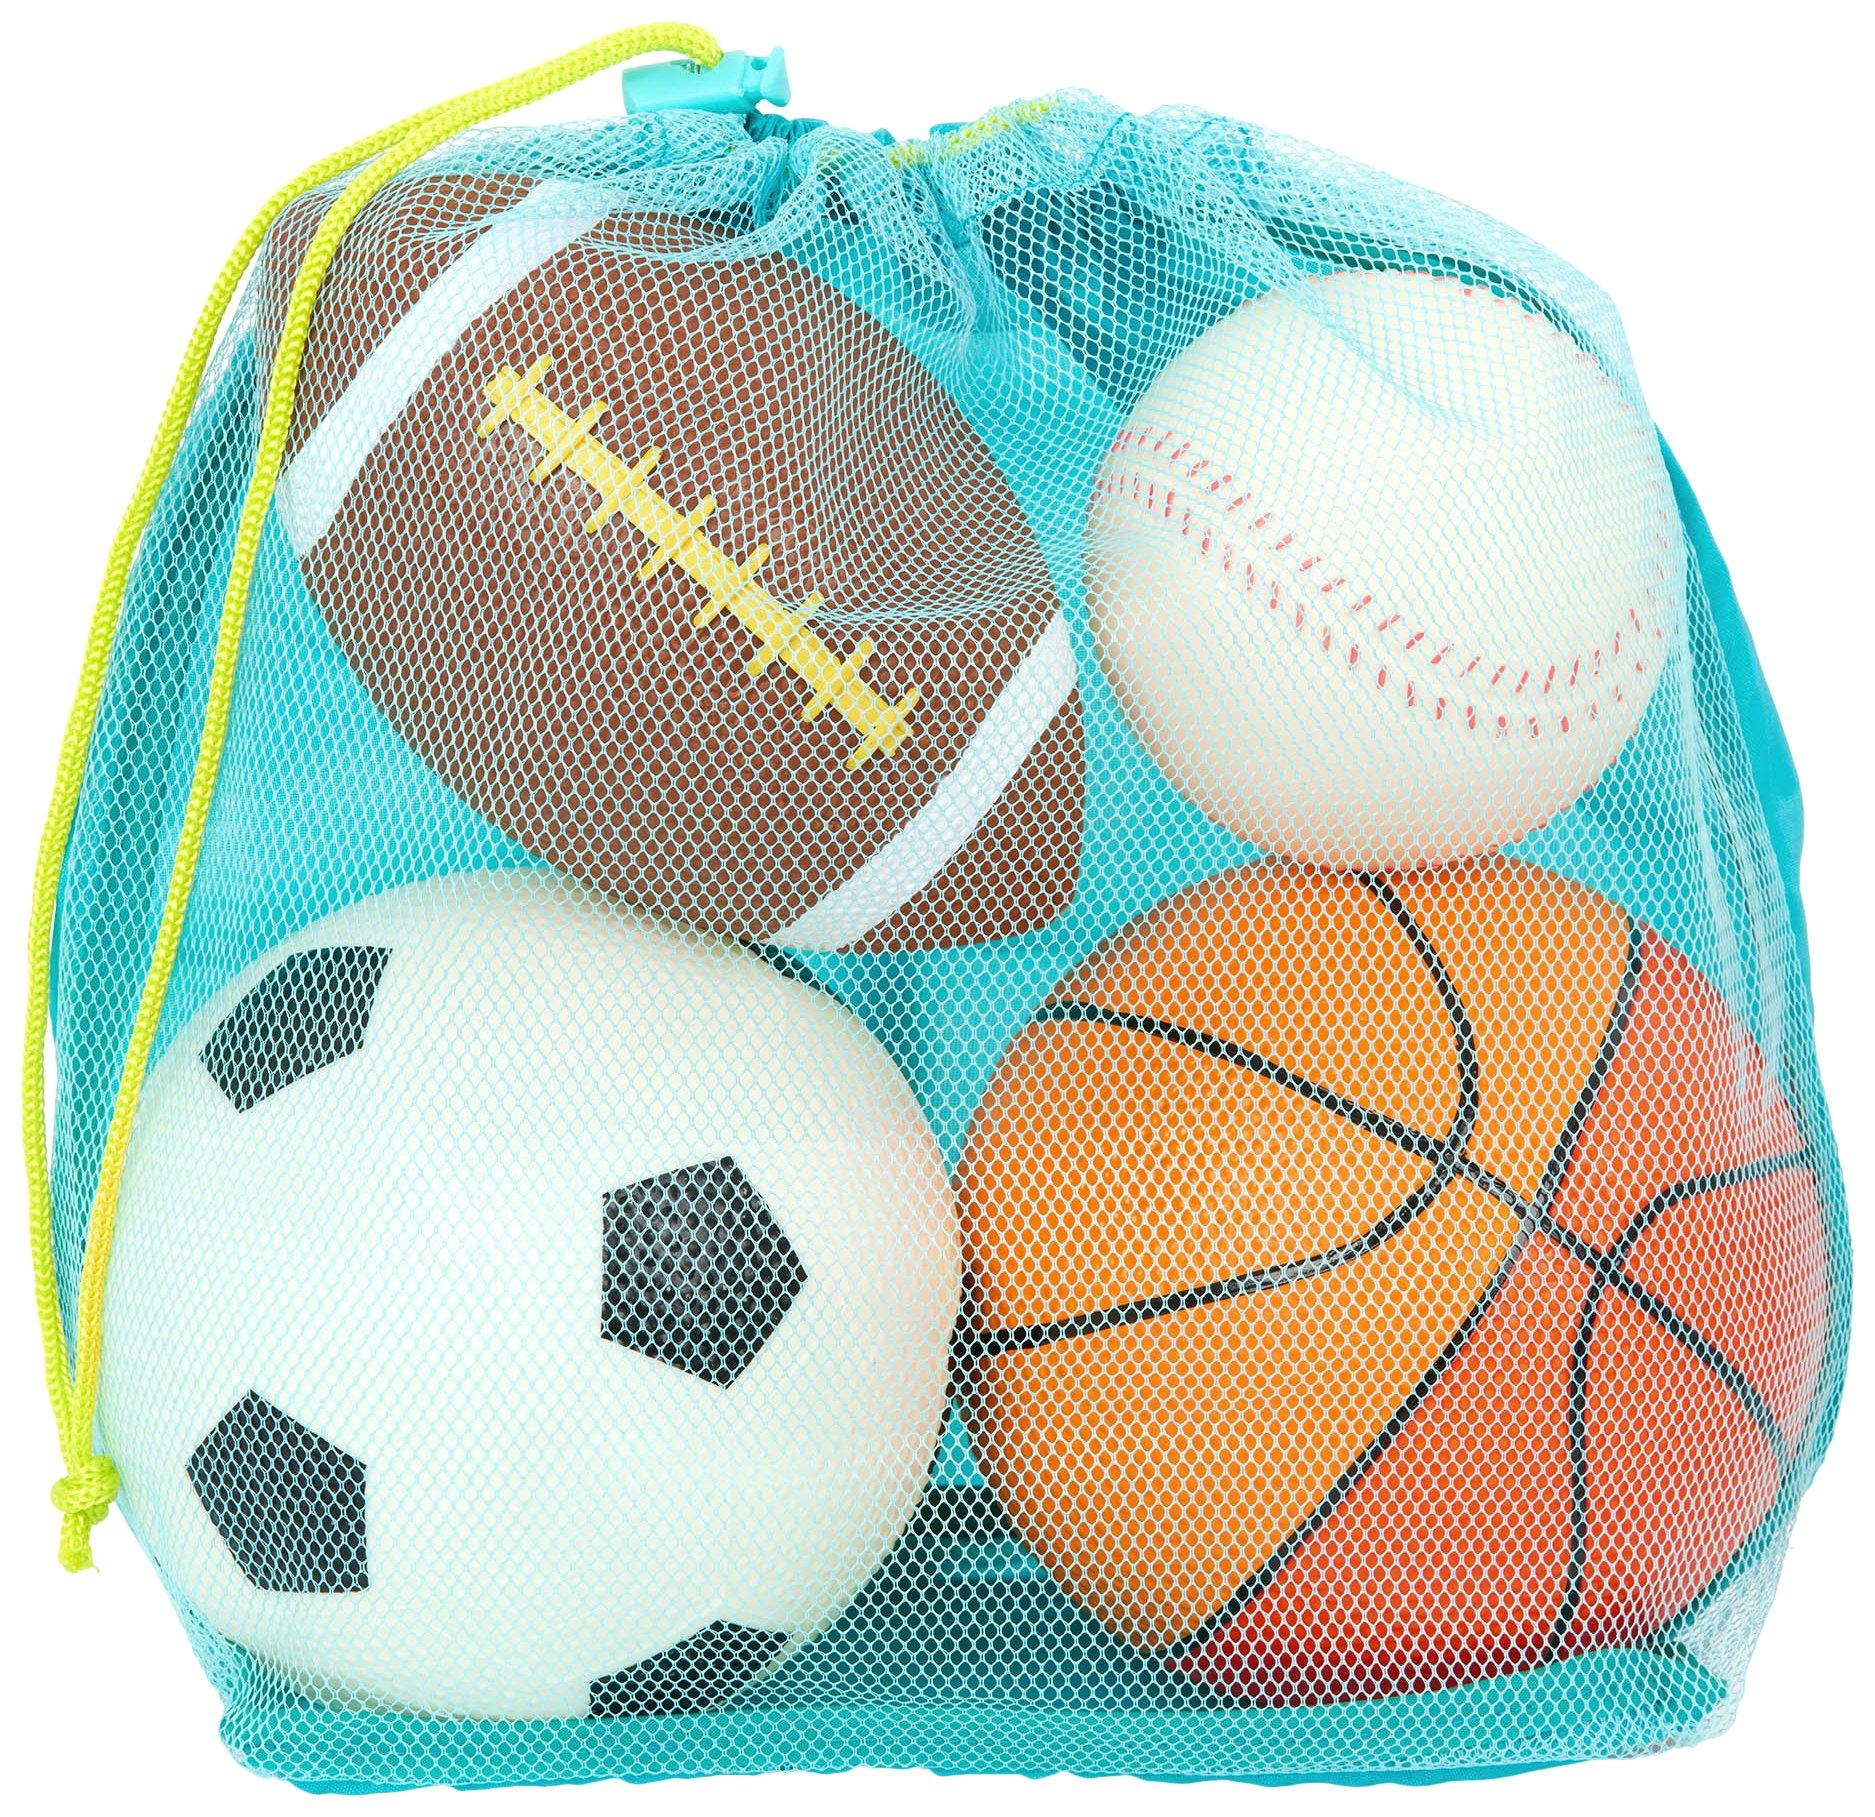 B Toys 4 Sports Balls and Carry Bag